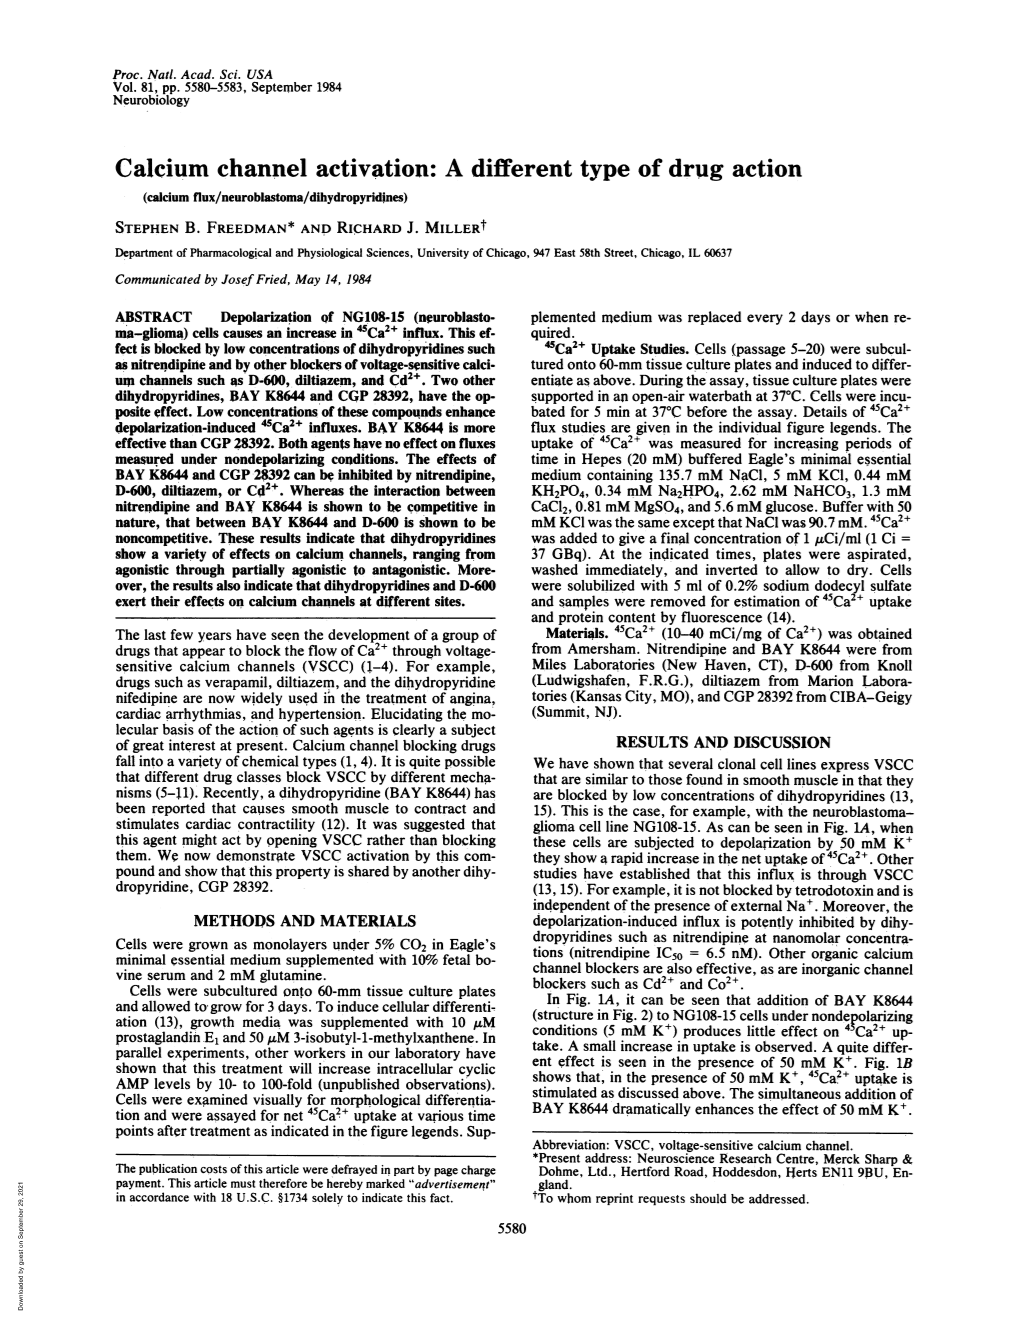 Calcium Channel Activation: a Different Type of Drug Action (Calcium Flux/Neuroblastoma/Dihydropyridines) STEPHEN B